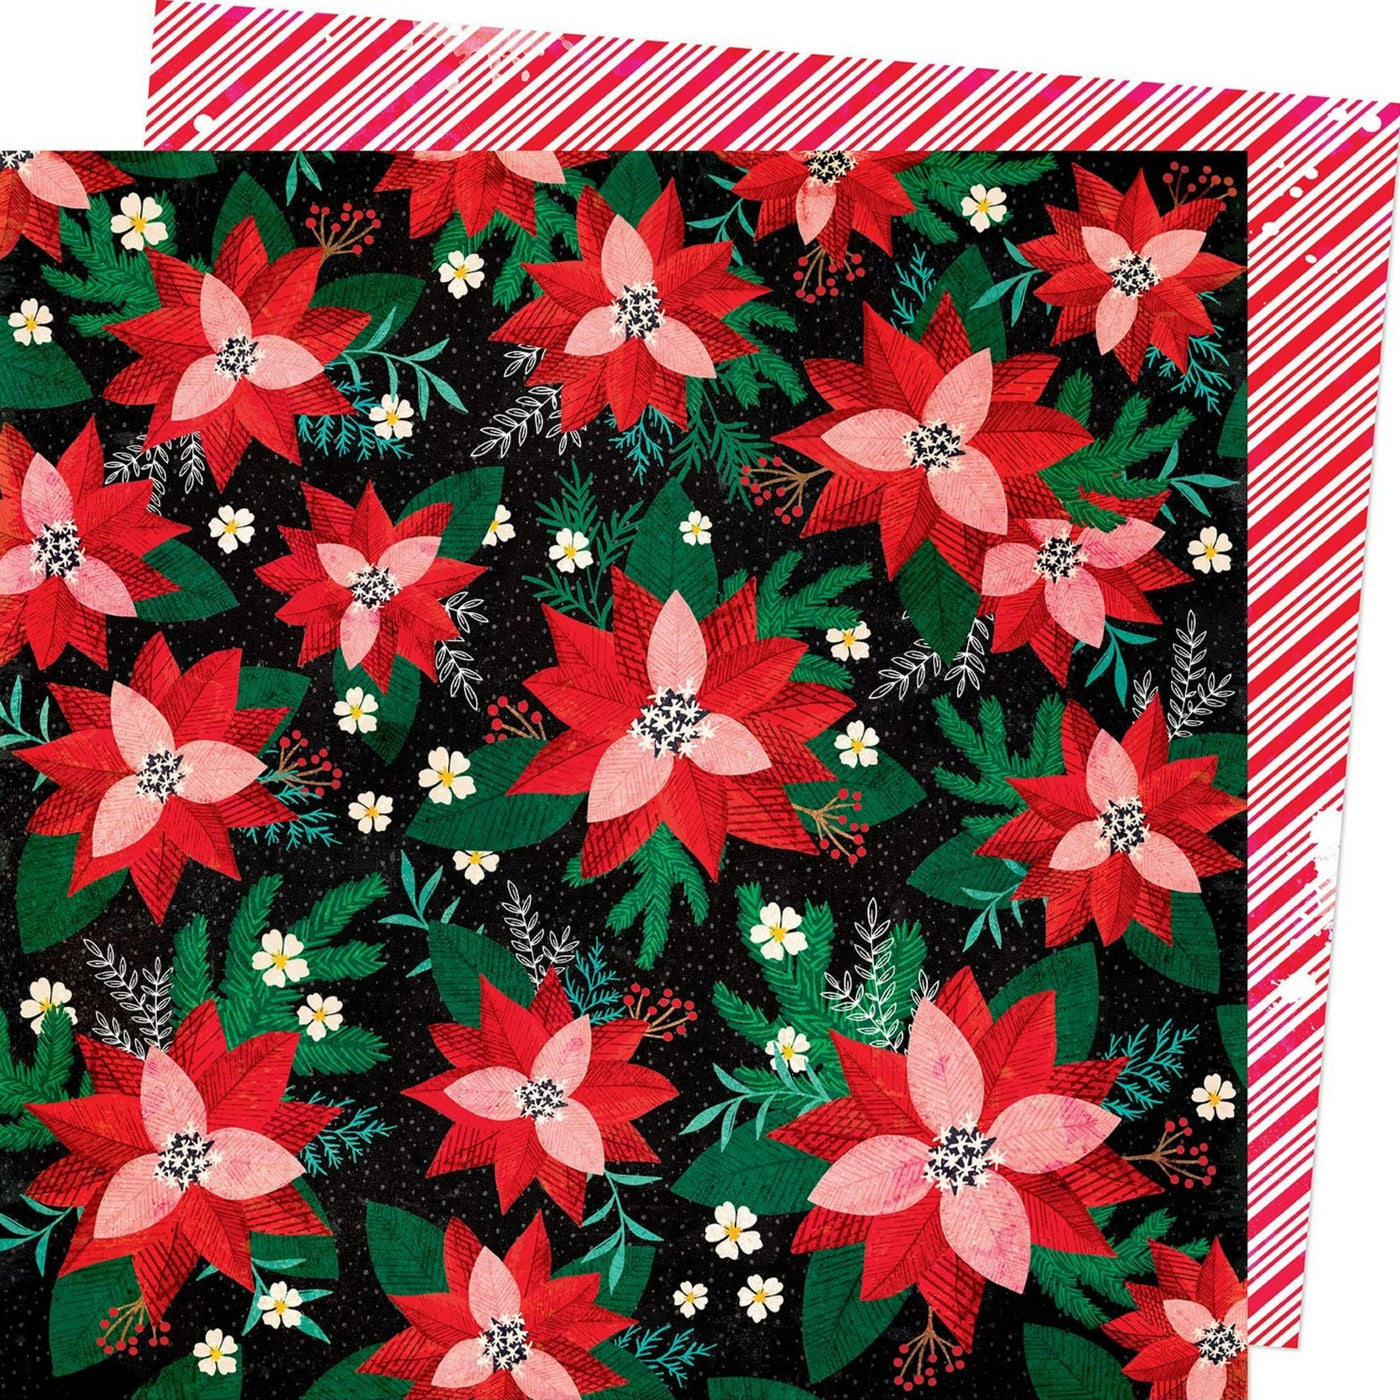 12x12 patterned cardstock (Side A - red  poinsettias in various sizes on a black background, Side B - red and white candy cane stripes) Archival quality.